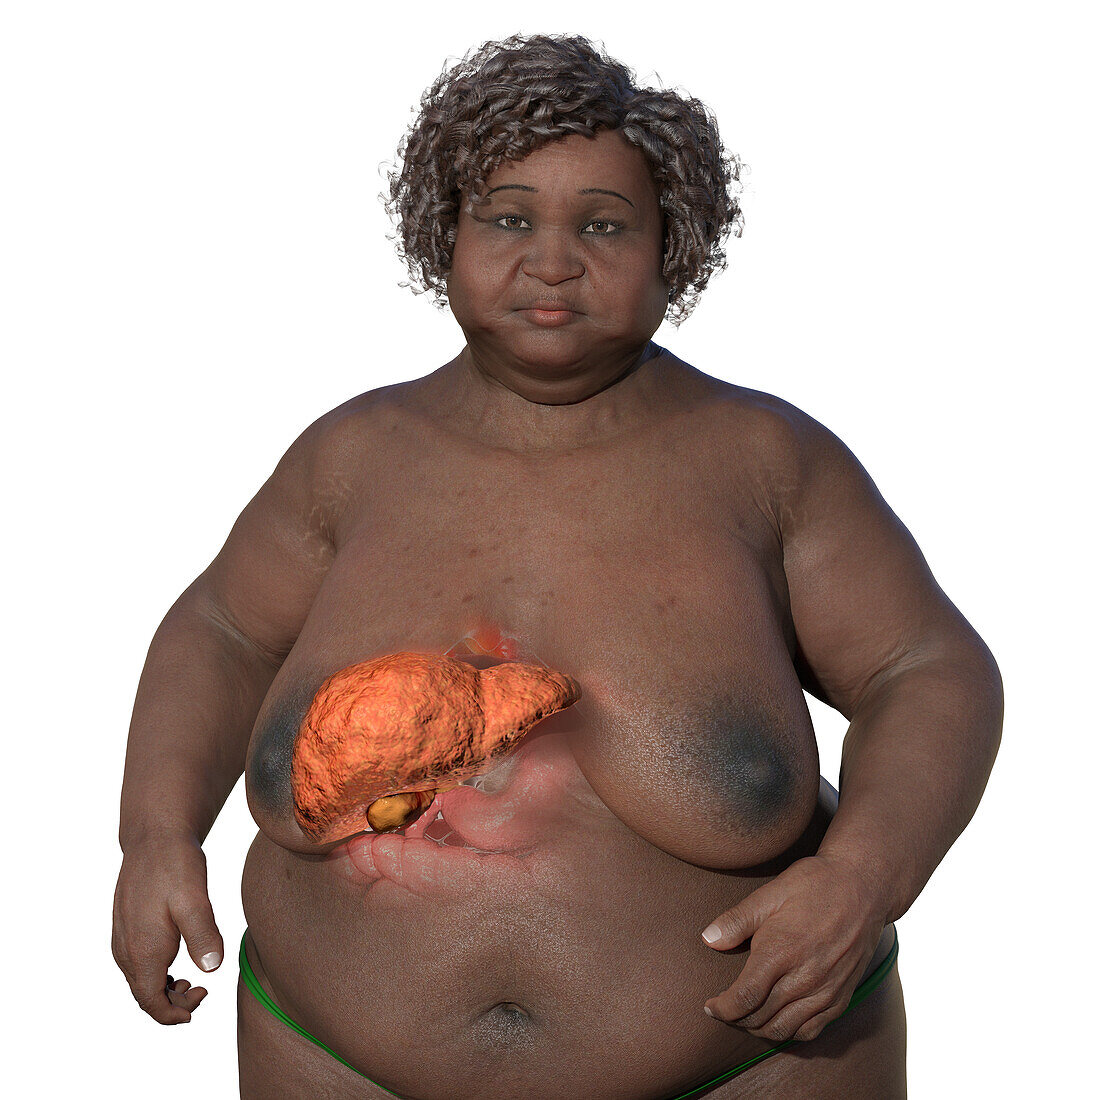 Overweight woman with liver steatosis, illustration